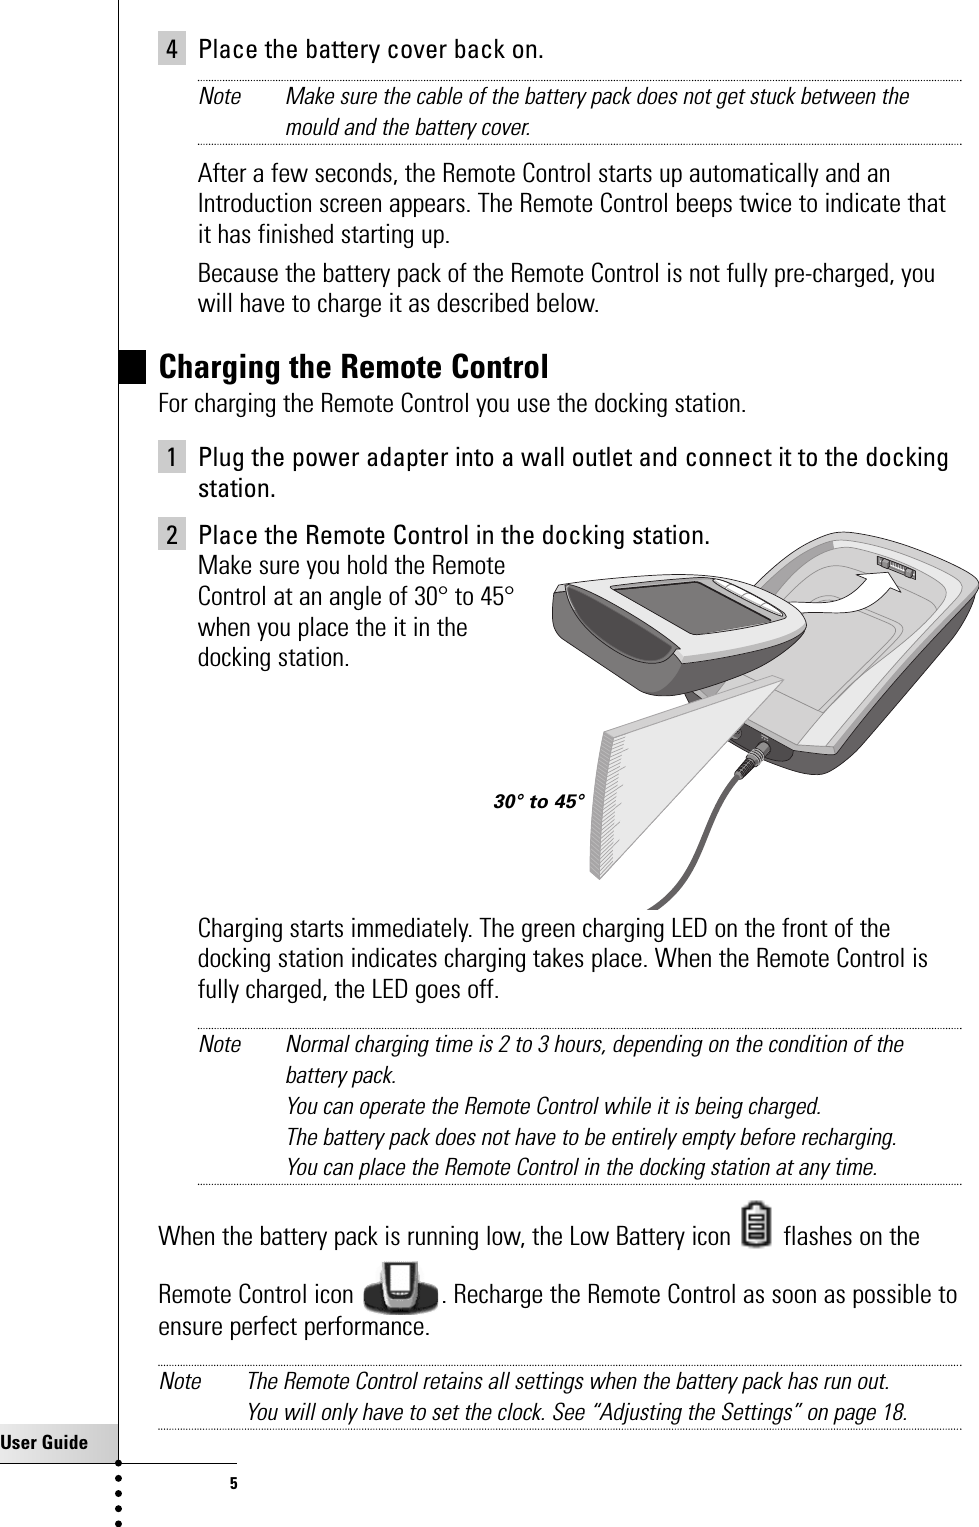 User Guide54 Place the battery cover back on.Note Make sure the cable of the battery pack does not get stuck between themould and the battery cover.After a few seconds, the Remote Control starts up automatically and anIntroduction screen appears. The Remote Control beeps twice to indicate thatit has finished starting up.  Because the battery pack of the Remote Control is not fully pre-charged, youwill have to charge it as described below.Charging the Remote Control For charging the Remote Control you use the docking station.1 Plug the power adapter into a wall outlet and connect it to the dockingstation.2 Place the Remote Control in the docking station. Make sure you hold the Remote Control at an angle of 30° to 45°when you place the it in the docking station.Charging starts immediately. The green charging LED on the front of thedocking station indicates charging takes place. When the Remote Control isfully charged, the LED goes off.Note Normal charging time is 2 to 3 hours, depending on the condition of thebattery pack. You can operate the Remote Control while it is being charged.The battery pack does not have to be entirely empty before recharging. You can place the Remote Control in the docking station at any time. When the battery pack is running low, the Low Battery icon  flashes on theRemote Control icon  . Recharge the Remote Control as soon as possible toensure perfect performance.Note The Remote Control retains all settings when the battery pack has run out. You will only have to set the clock. See “Adjusting the Settings” on page 18.Taking a First Look30° to 45°